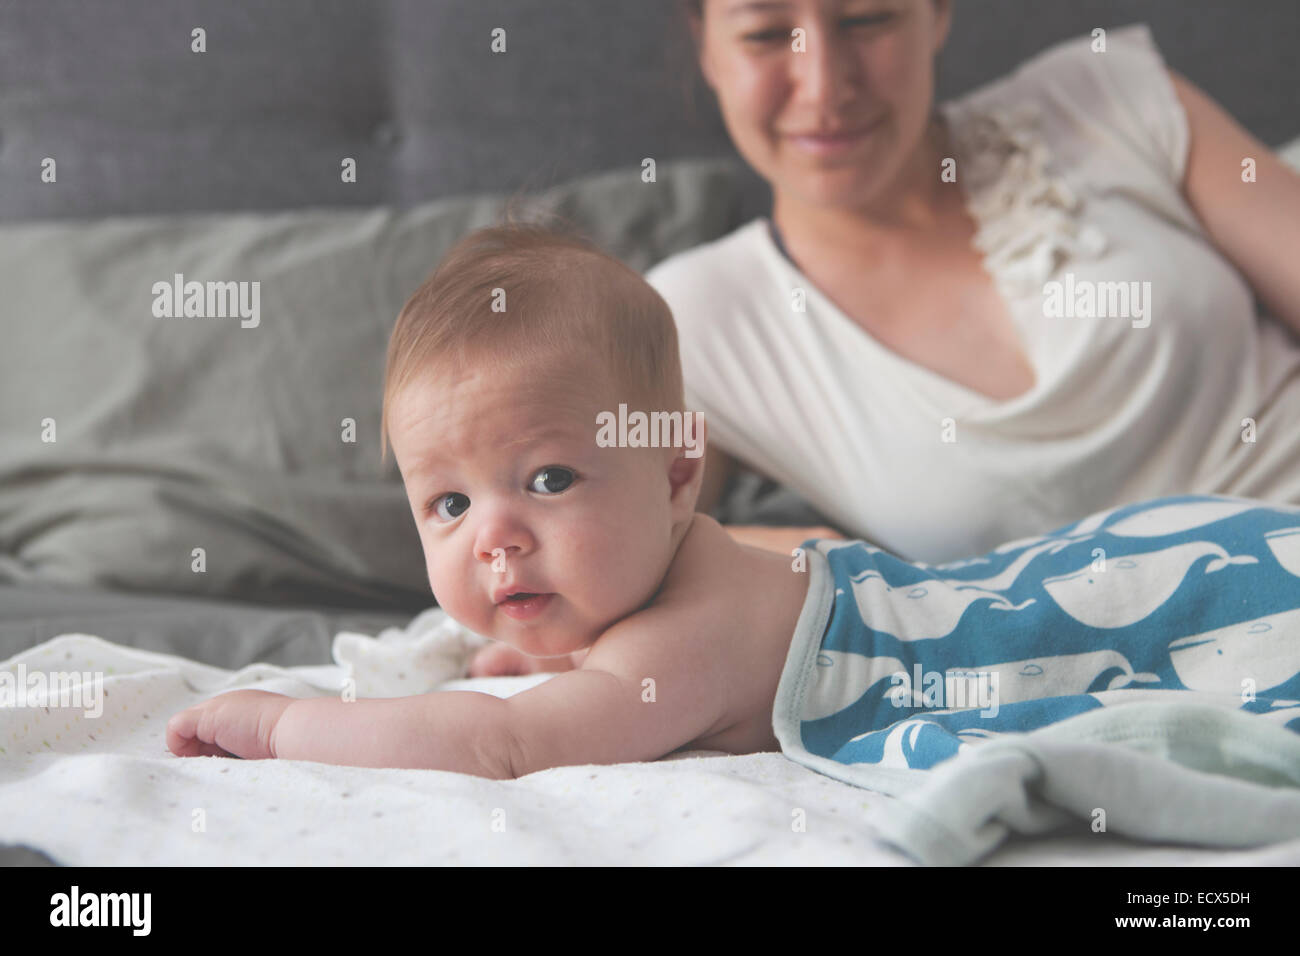 Portrait of little baby lying on bed with mother smiling in background Banque D'Images